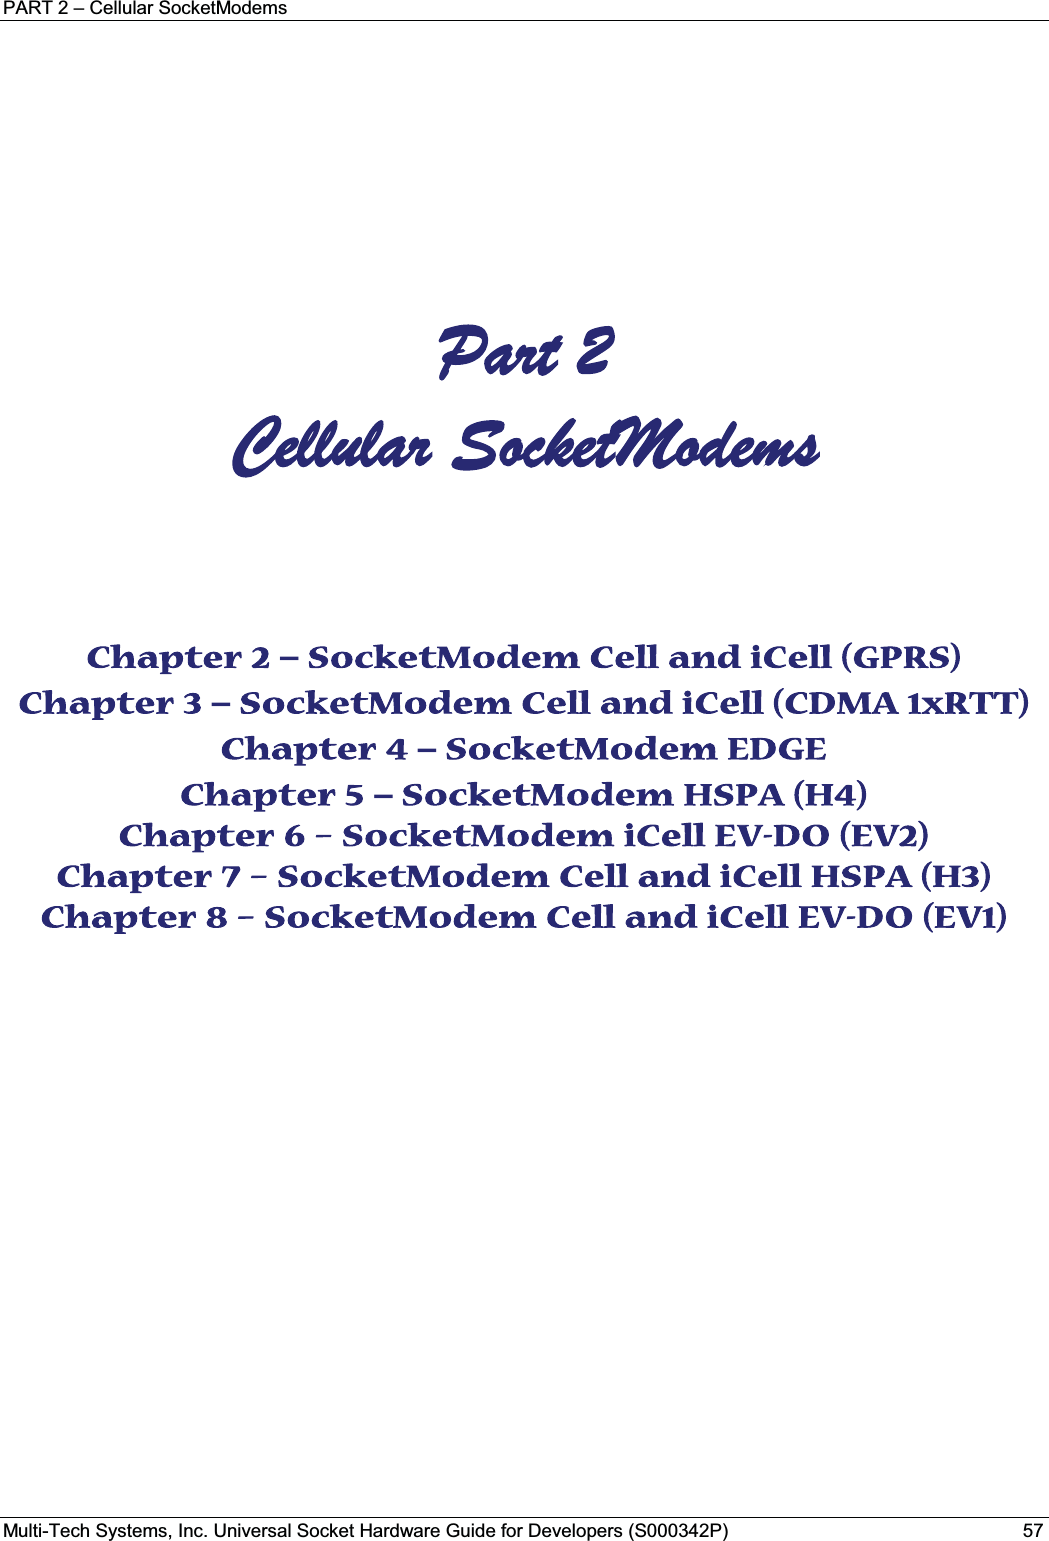 PART 2 – Cellular SocketModemsMulti-Tech Systems, Inc. Universal Socket Hardware Guide for Developers (S000342P) 57     Part 2  Cellular SocketModems Chapter 2 – SocketModem Cell and iCell (GPRS) Chapter 3 – SocketModem Cell and iCell (CDMA 1xRTT) Chapter 4 – SocketModem EDGE Chapter 5 – SocketModem HSPA (H4) Chapter 6 – SocketModem iCell EV-DO (EV2) Chapter 7 – SocketModem Cell and iCell HSPA (H3) Chapter 8 – SocketModem Cell and iCell EV-DO (EV1)    